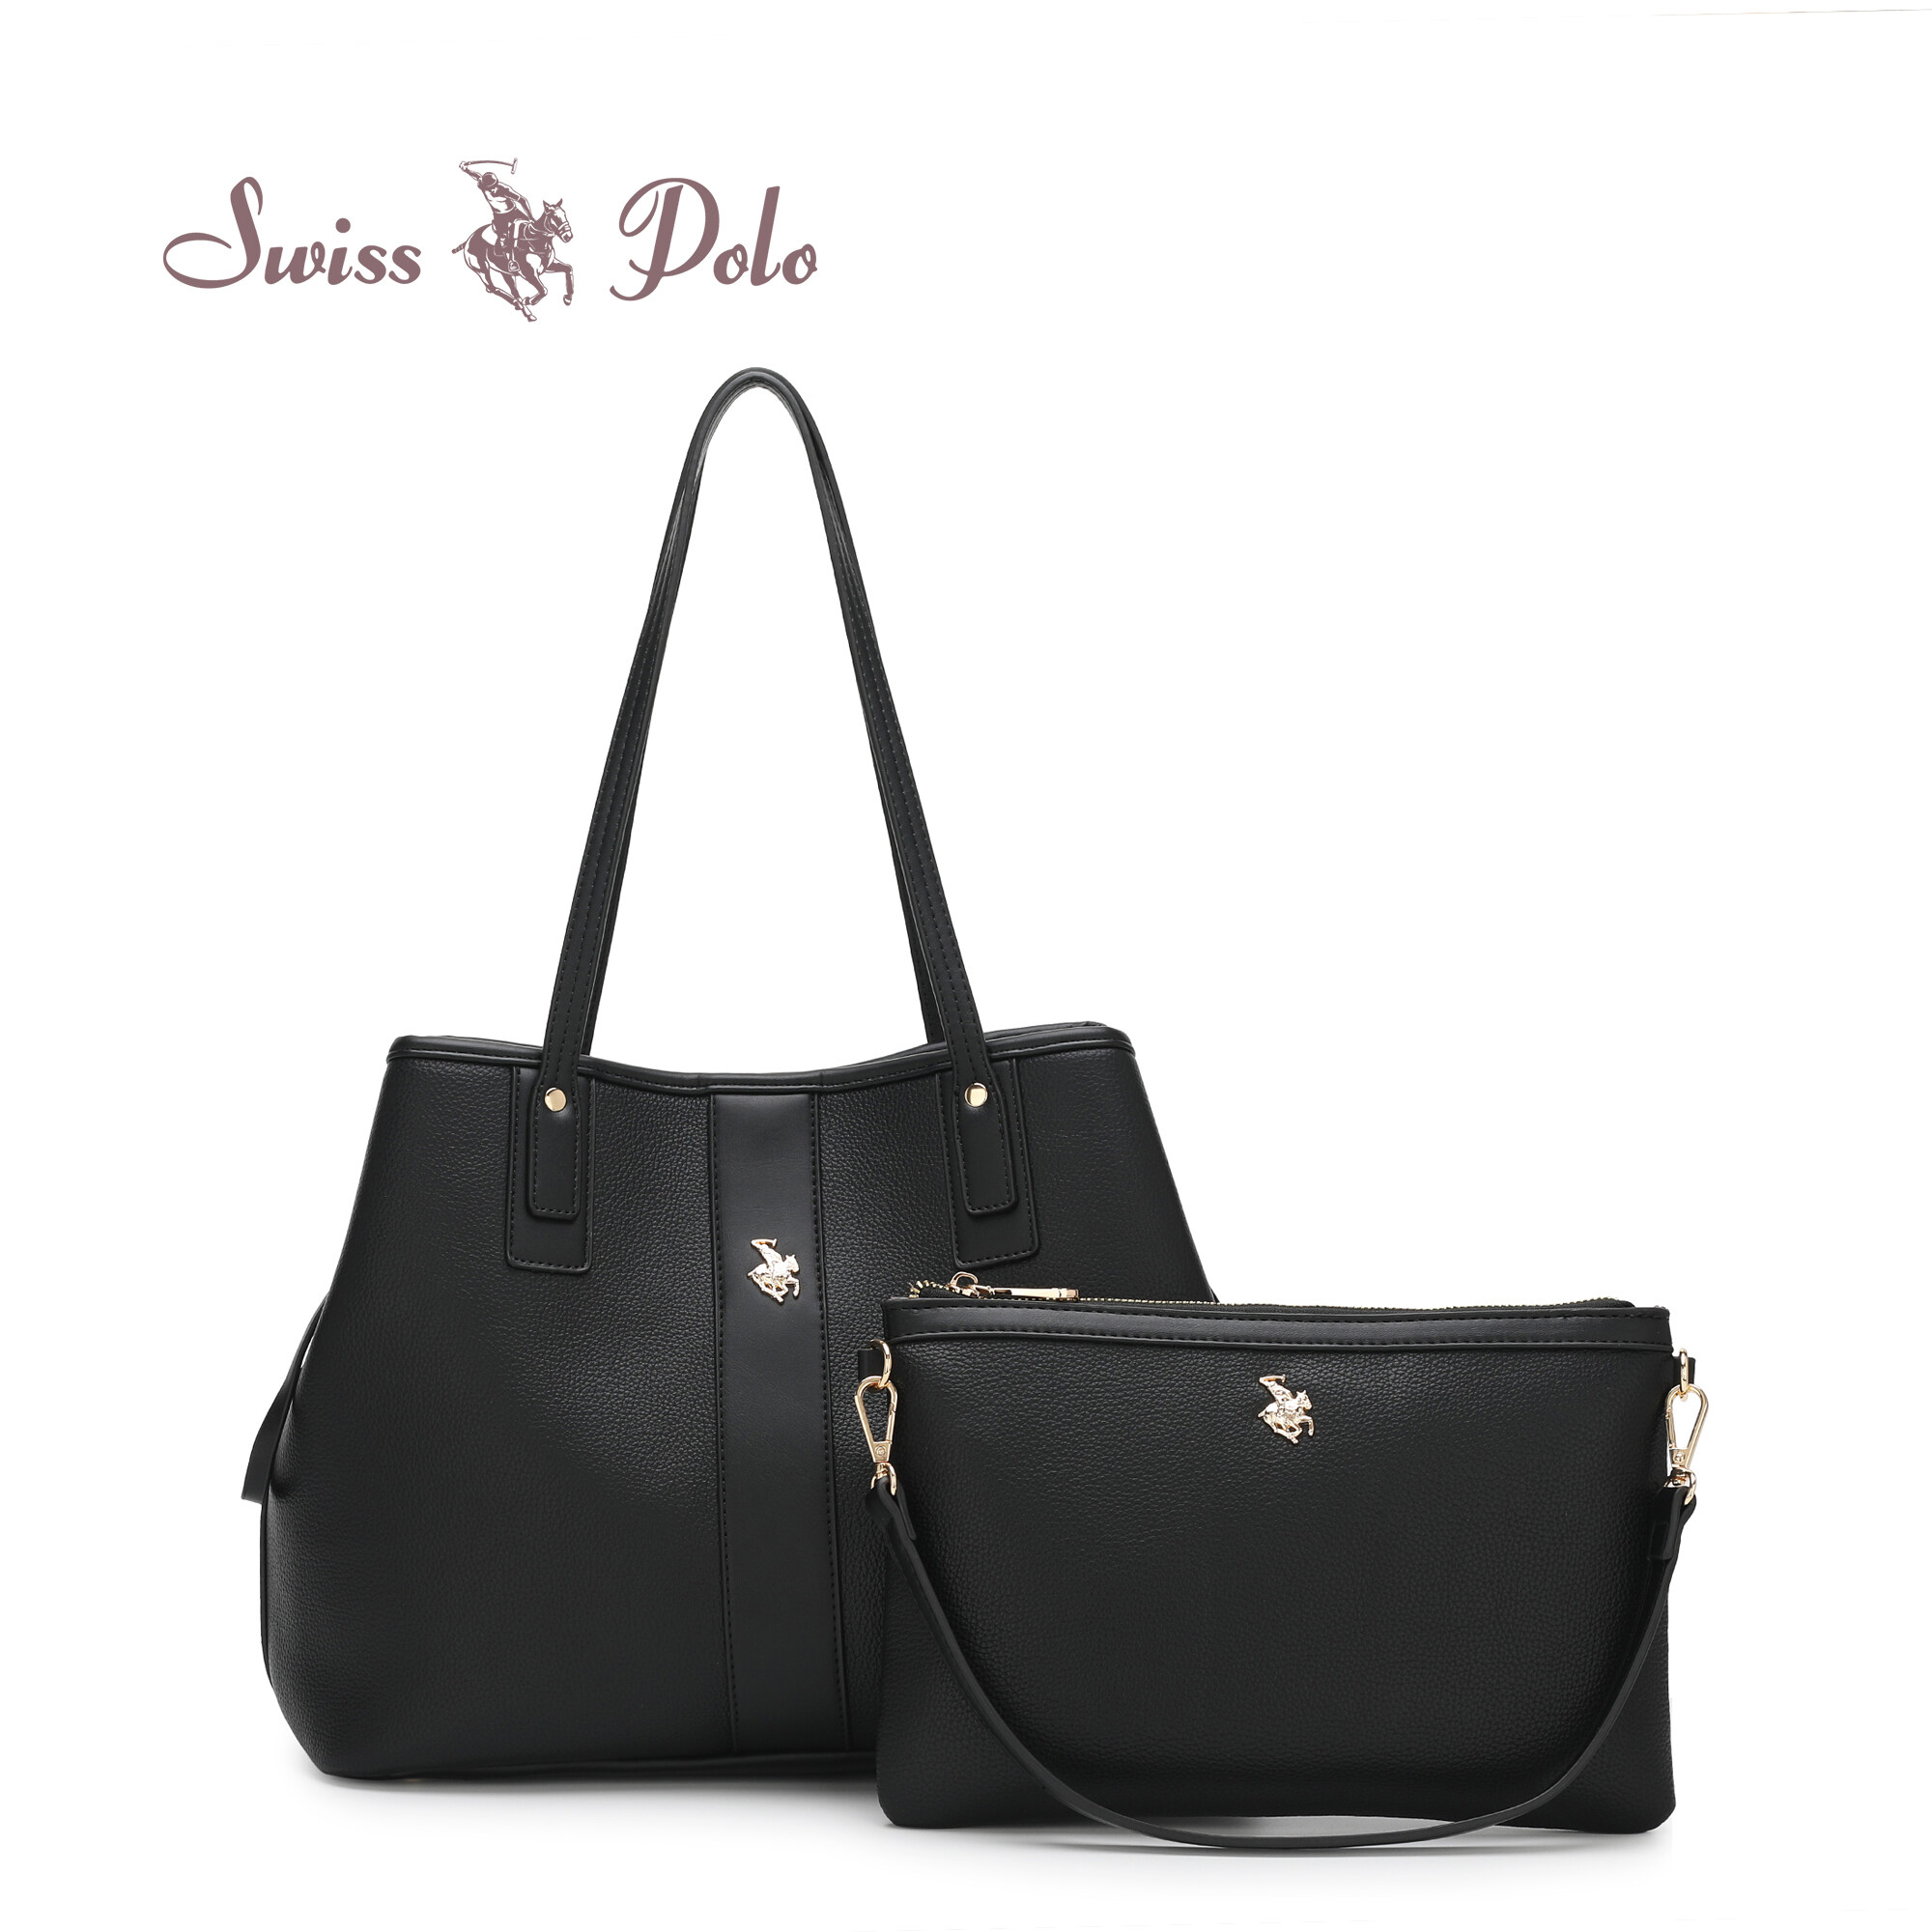 SWISS POLO 2 In 1 Ladies Top Handle Tote Bag With Pouch HFT 7686-1 BLACK